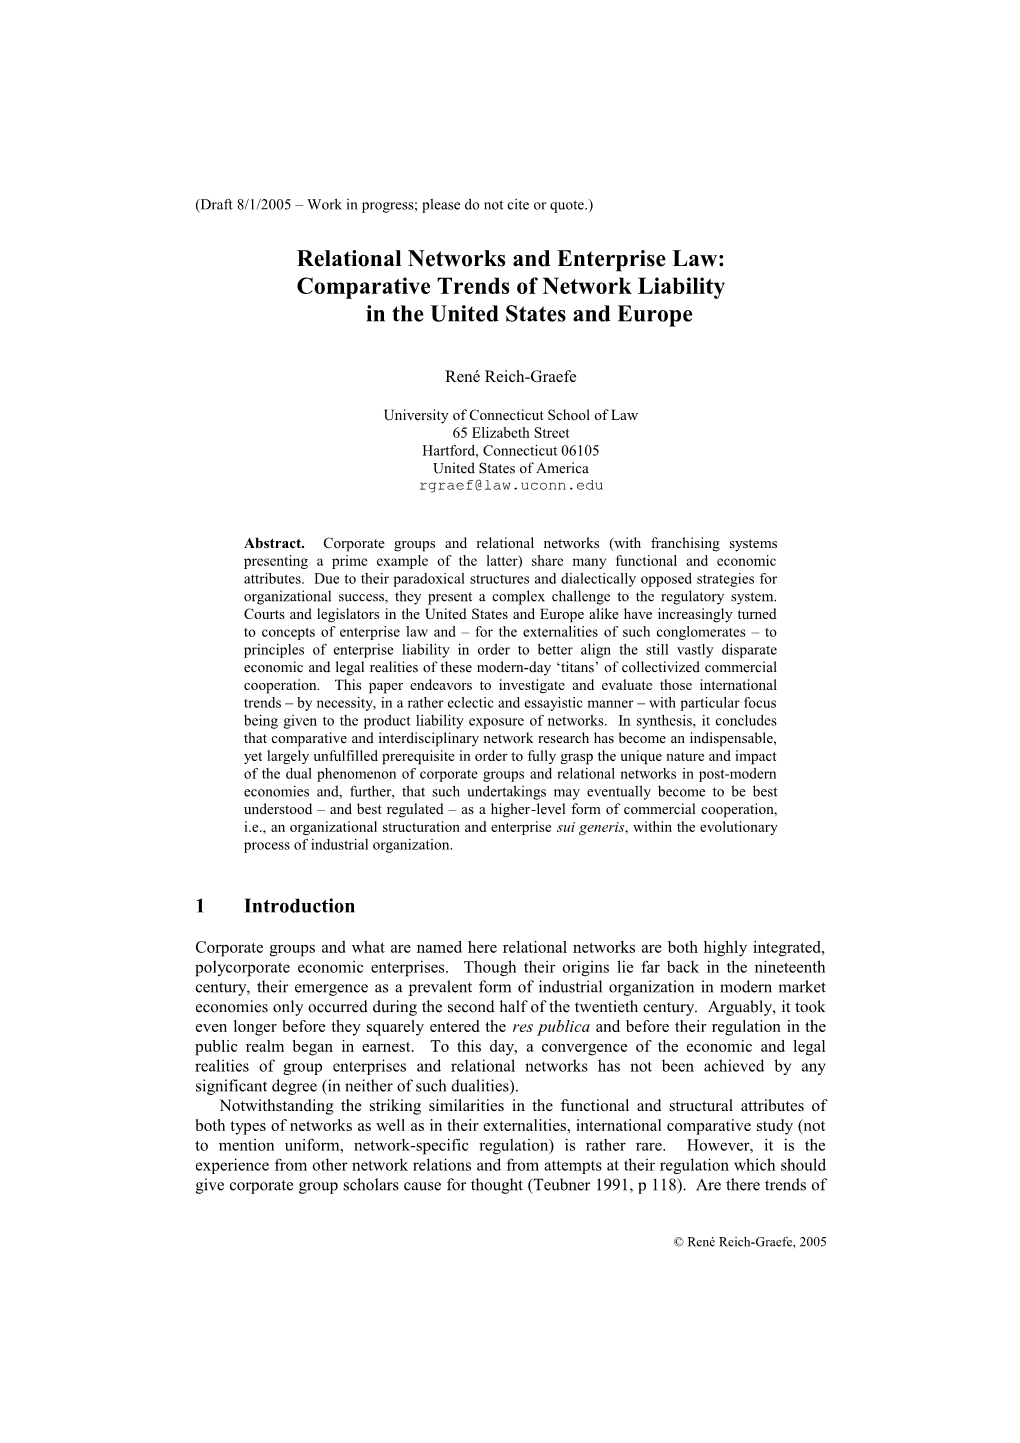 Relational Networks and Enterprise Law